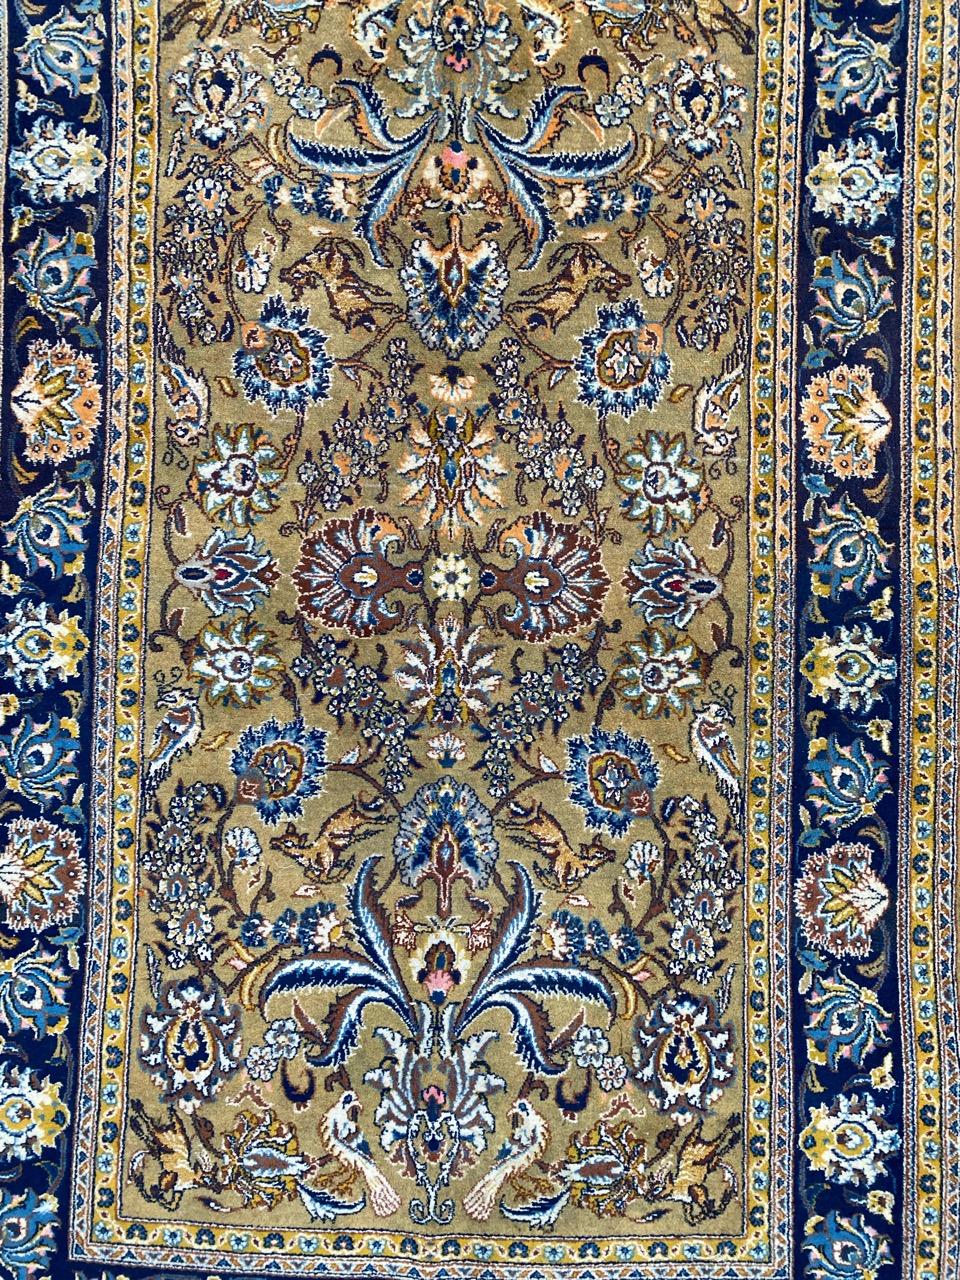 Nice mid century Kashan rug with beautiful floral and animal design and nice colors, entirely and finely hand knotted with wool velvet on cotton foundation.

✨✨✨
